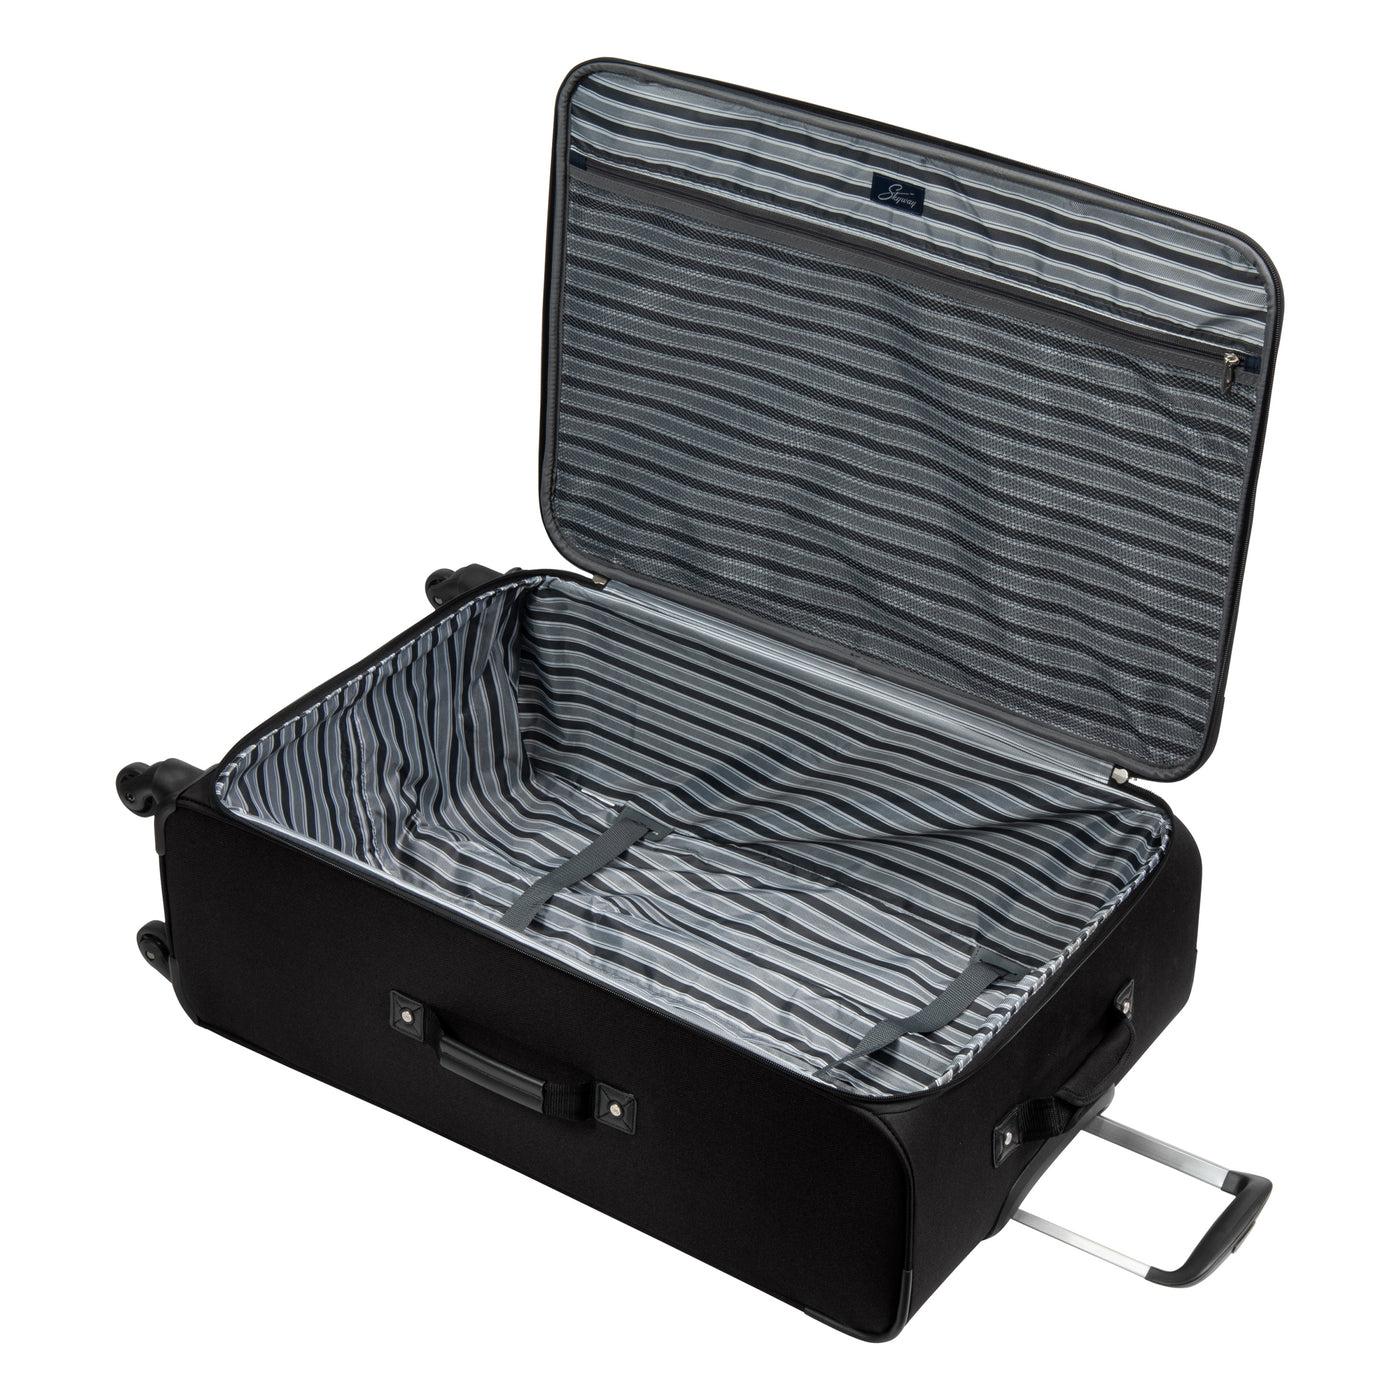 Epic Softside 2-Piece Set - Carry-On and Large Check-In